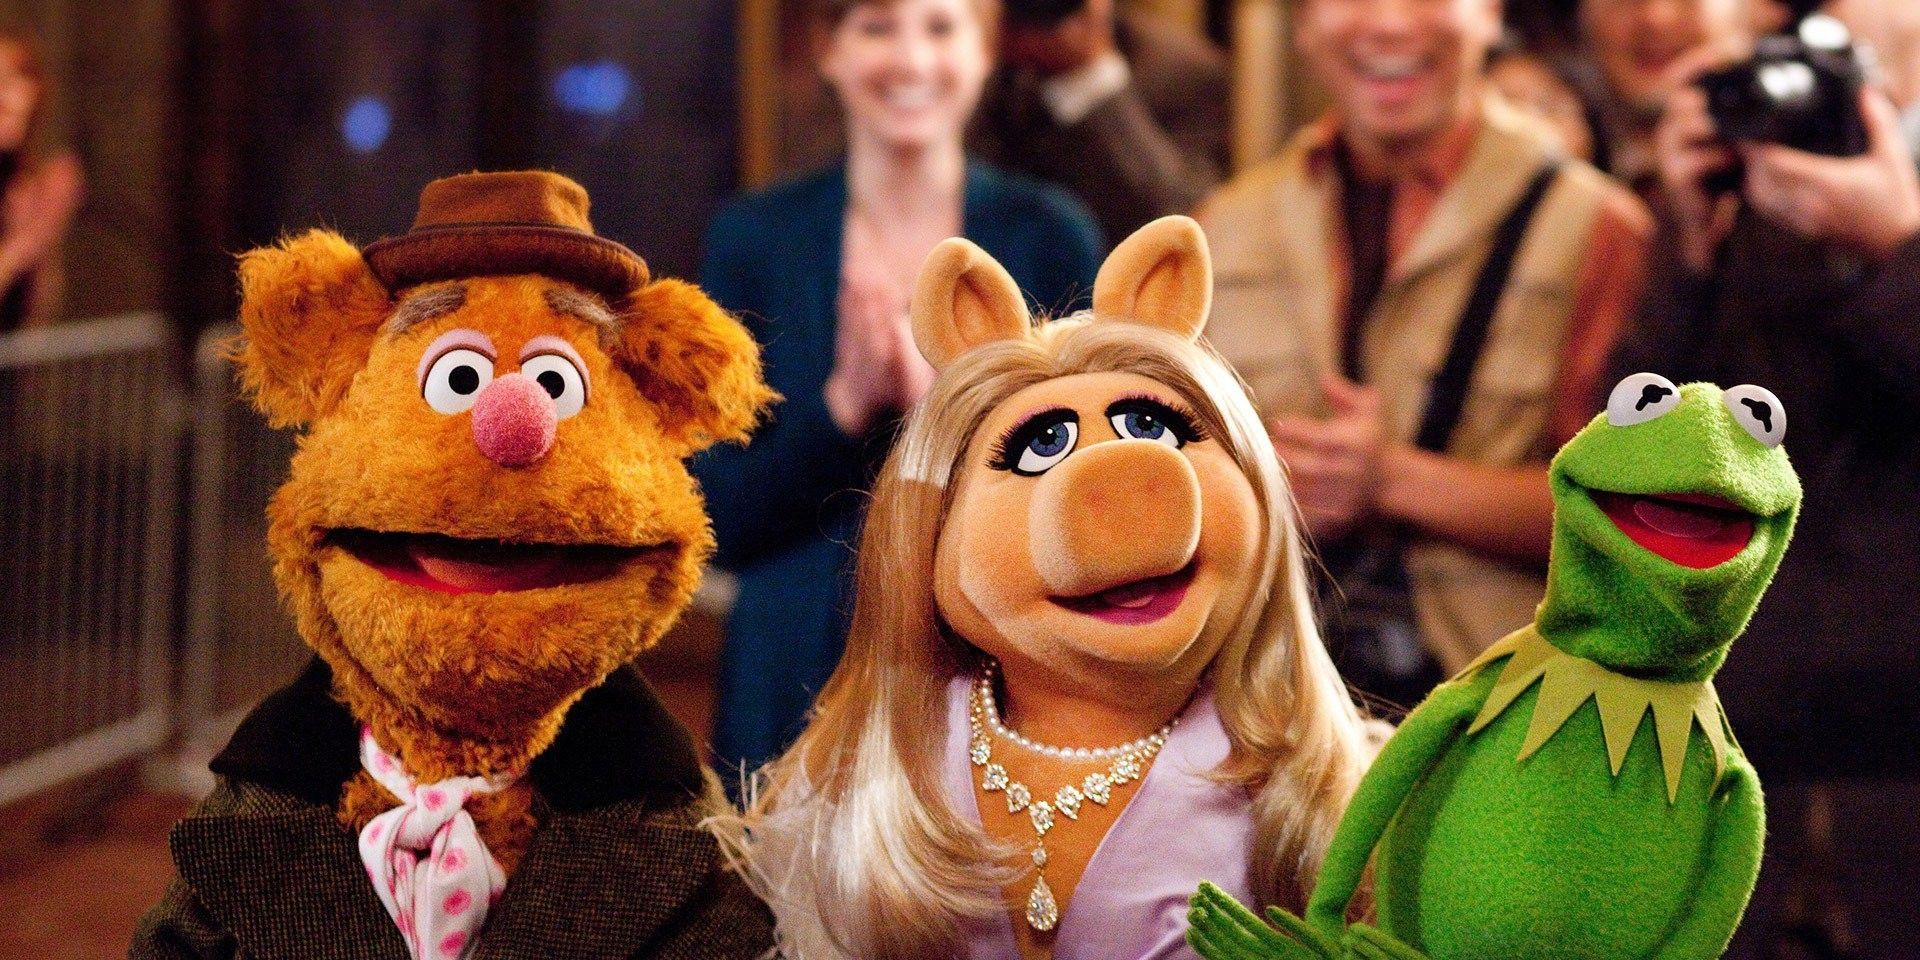 Muppets Live Another Day Disney+ Show Not Happening | Screen Rant